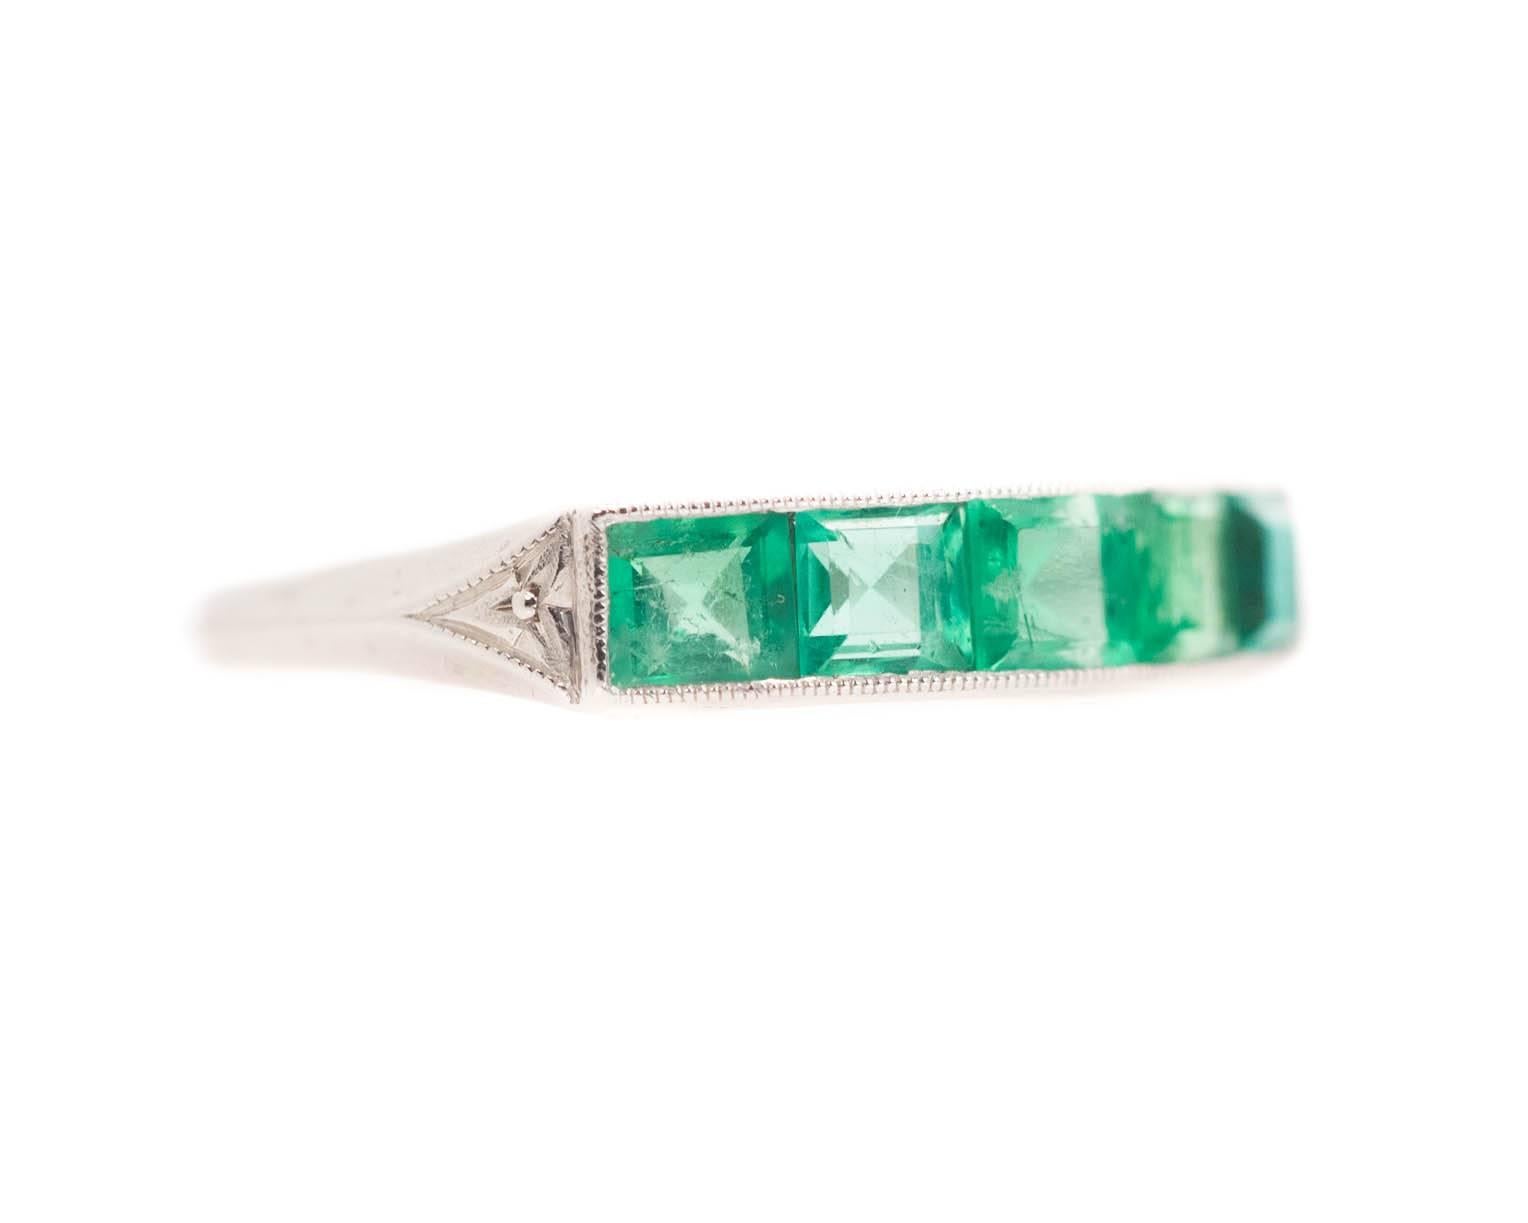 1915 Edwardian Era Antique Platinum & Colombian Emerald Ring

Features 1.0 cttw Square Emerald cut Colombian Emeralds. The 5 square emerald cut stones are set horizontally in shining Platinum. The Platinum accentuates the beauty of the gorgeous